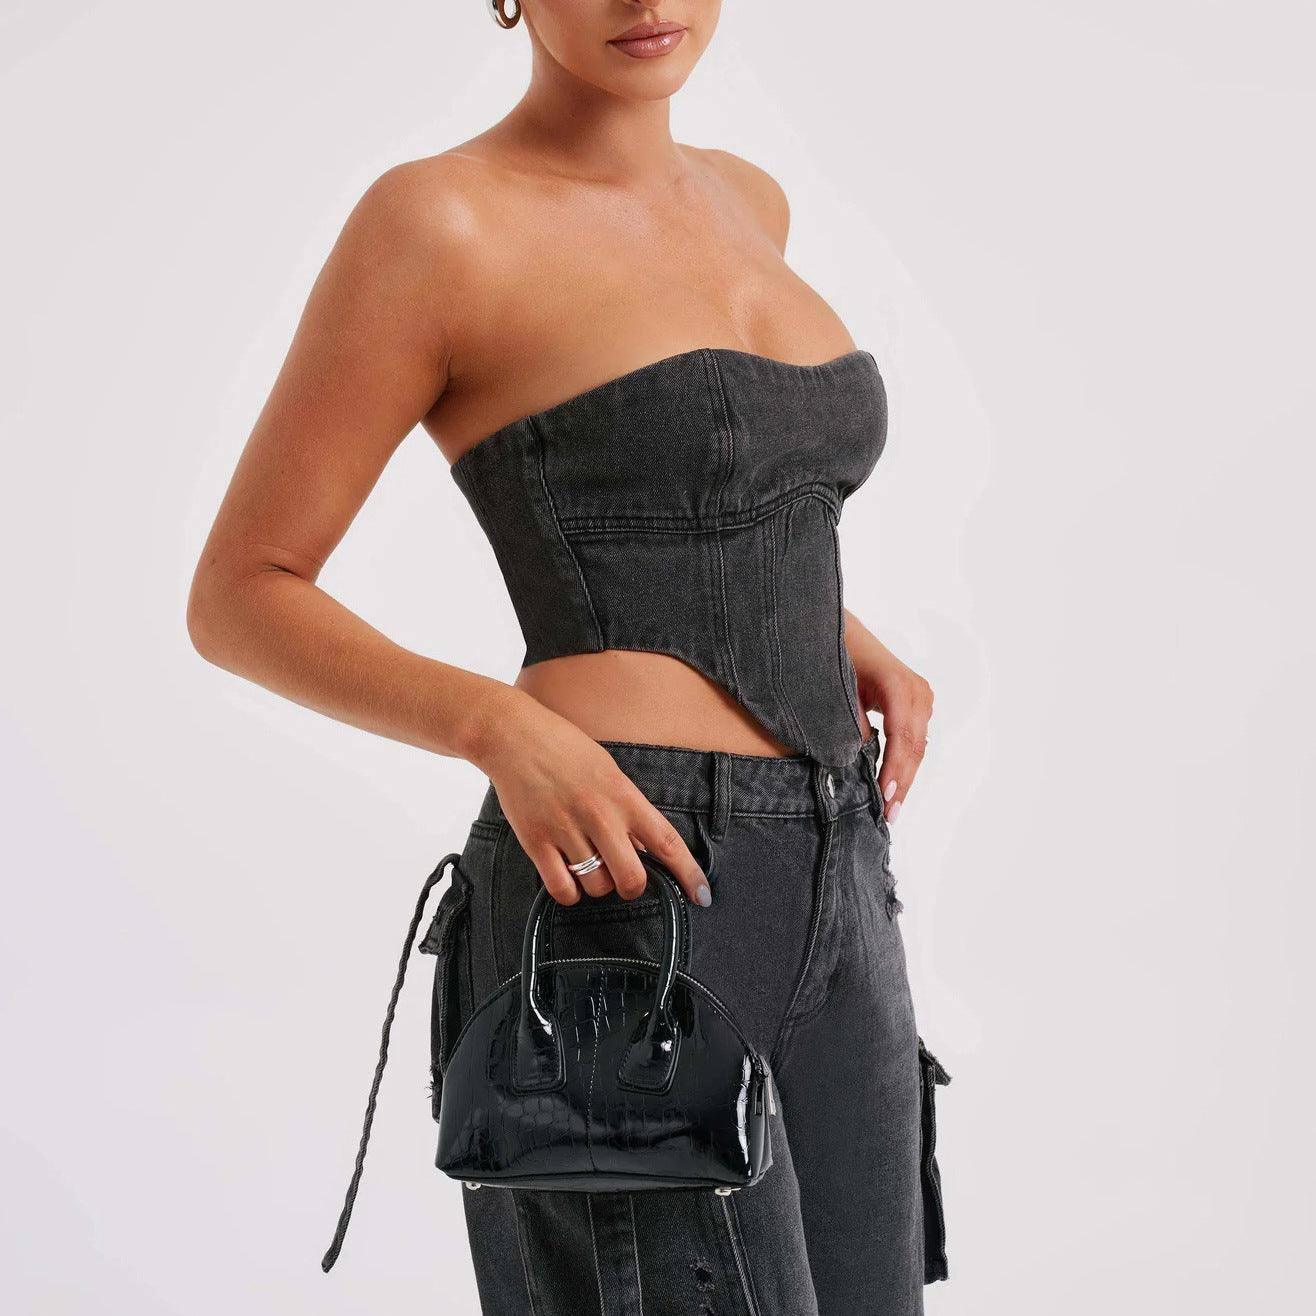 Stylish Denim Outfit: Trendy Strapless Top & Cargo Jeans-Black-6